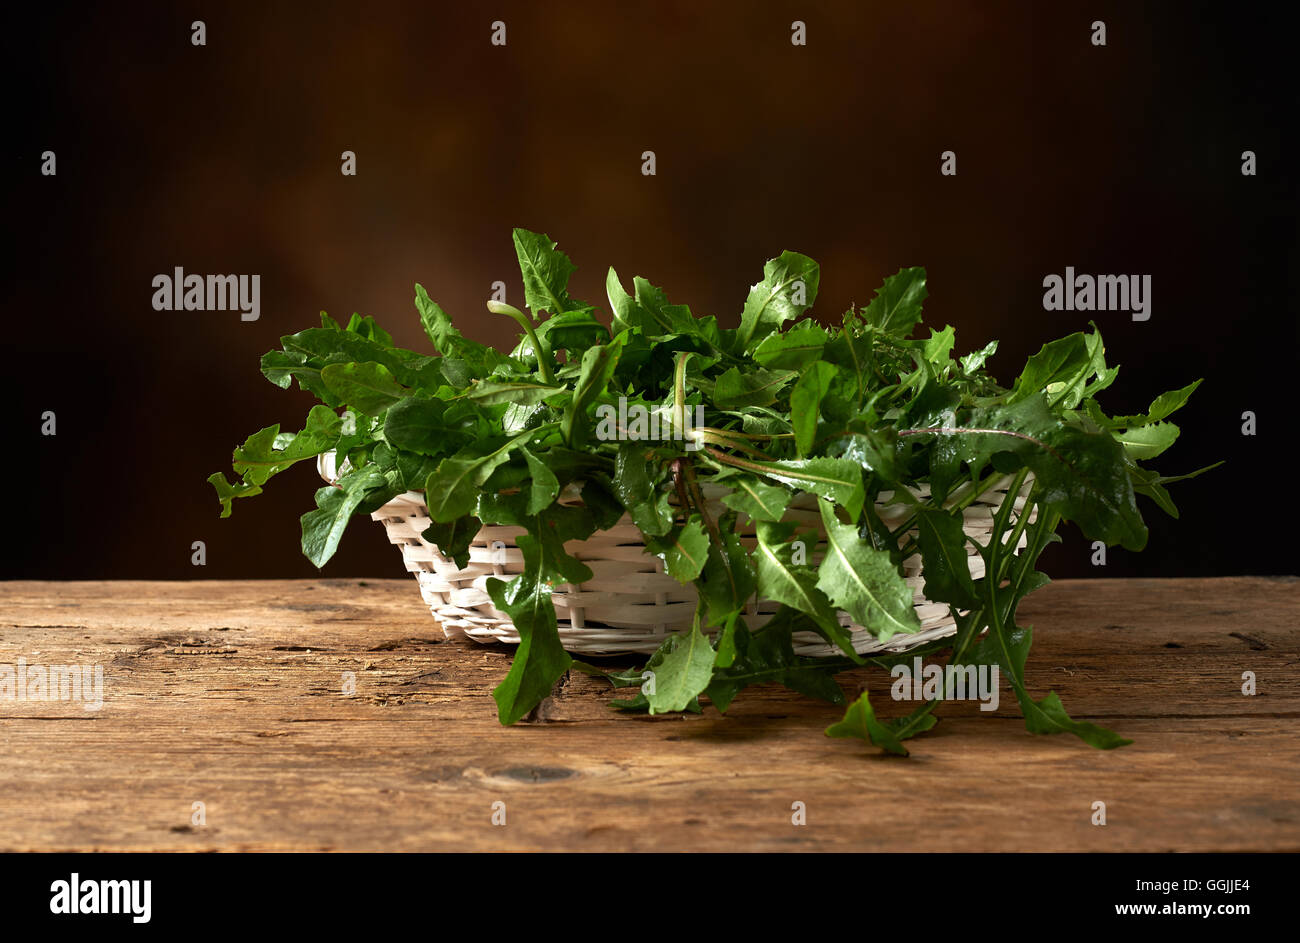 fresh green leafy vegetable on a wooden kitchen bench. Stock Photo